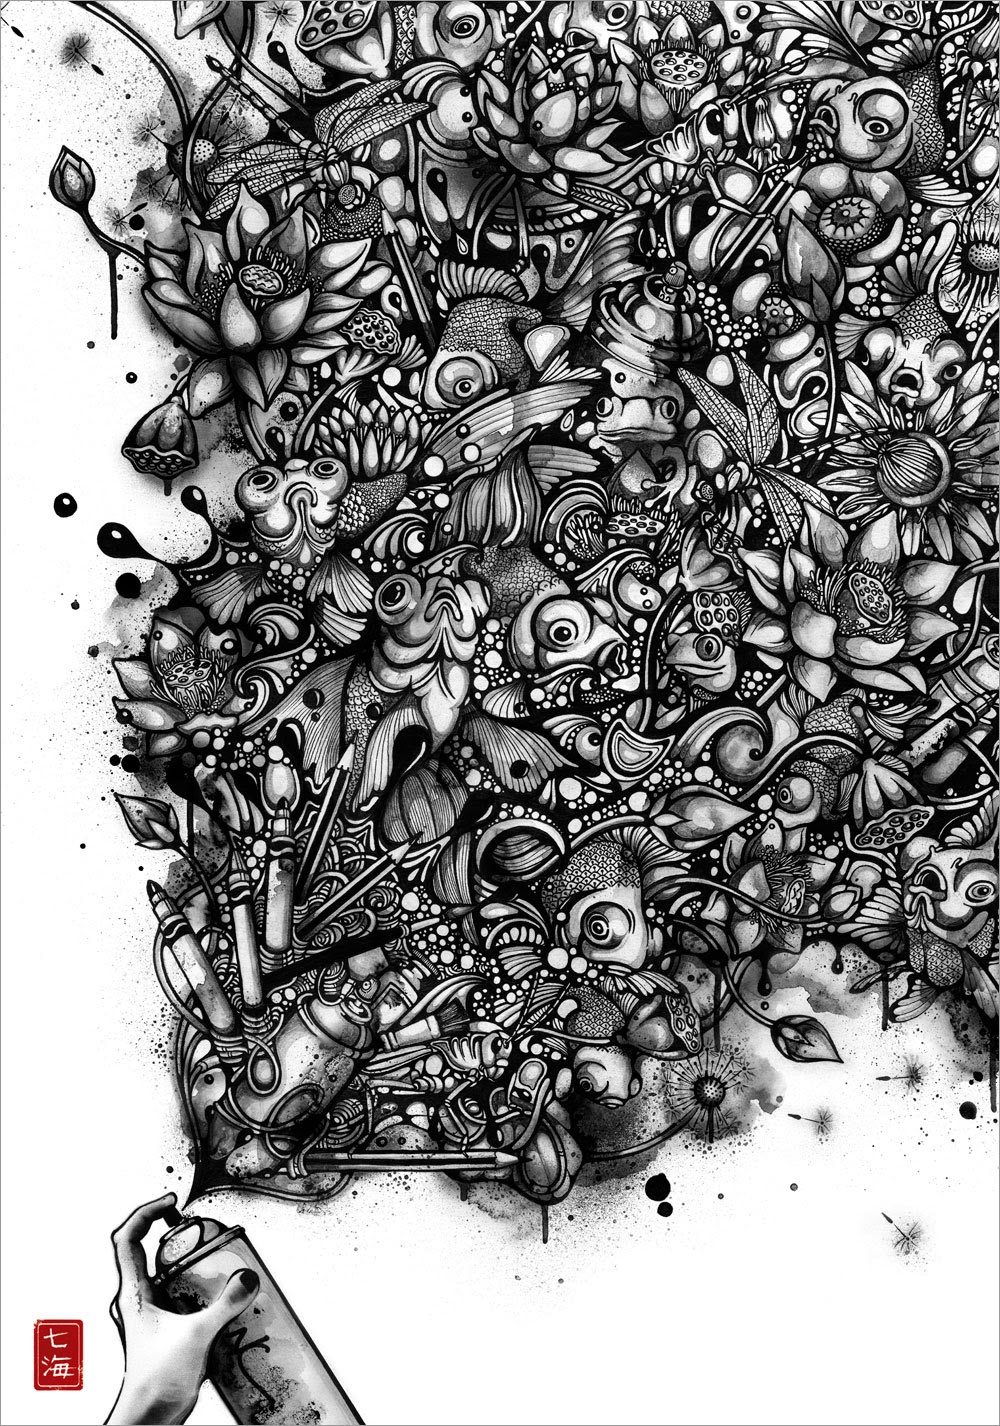 08-Ink-Pond-Nanami-Cowdroy-Splashes-of-Ink-Drawings-www-designstack-co